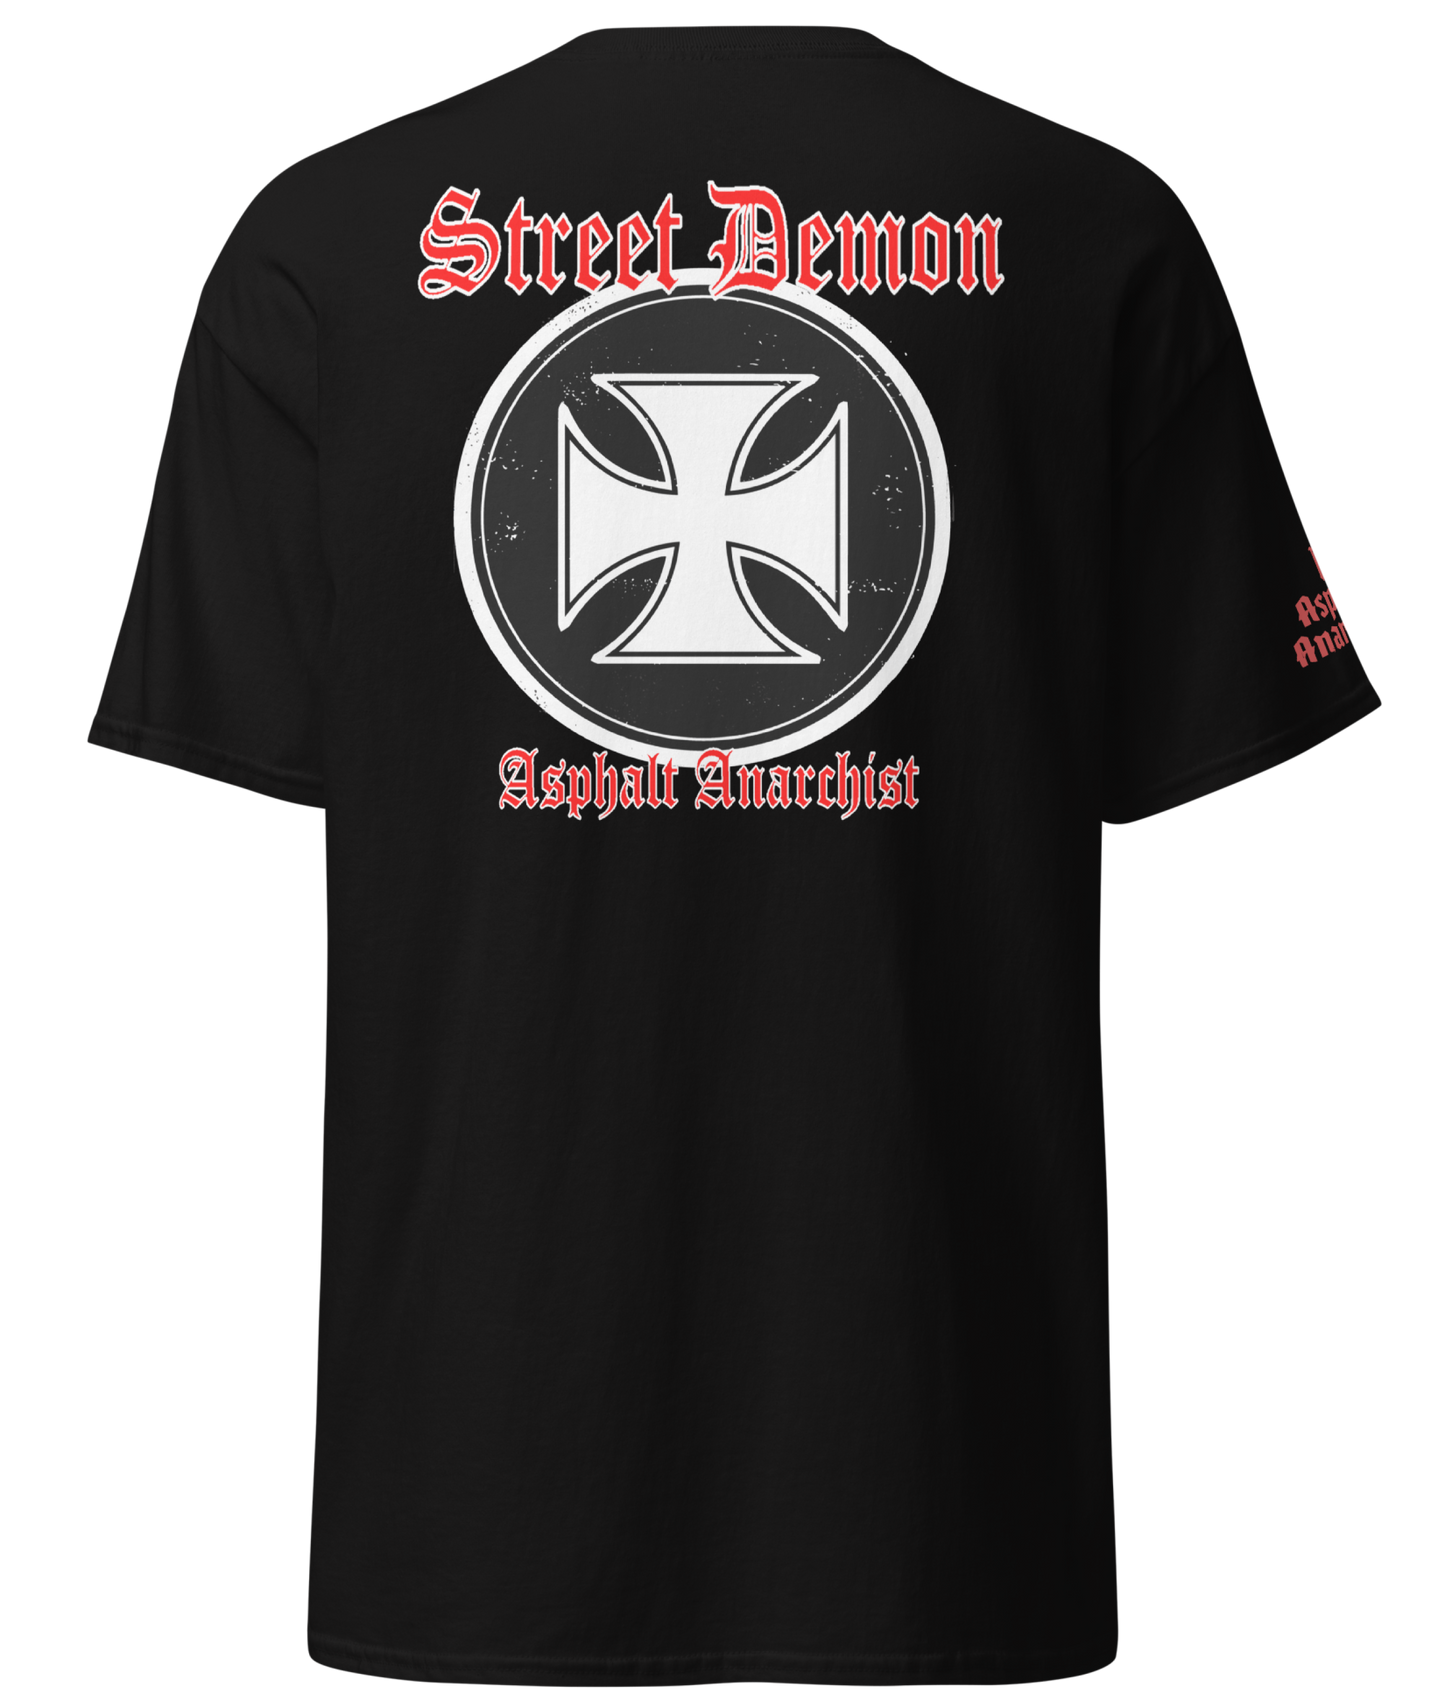 The Street Demon Tee From Asphalt Anarchist Clothing Co. HOT ROD KUSTOM KULTURE APPAREL & PRODUCTS